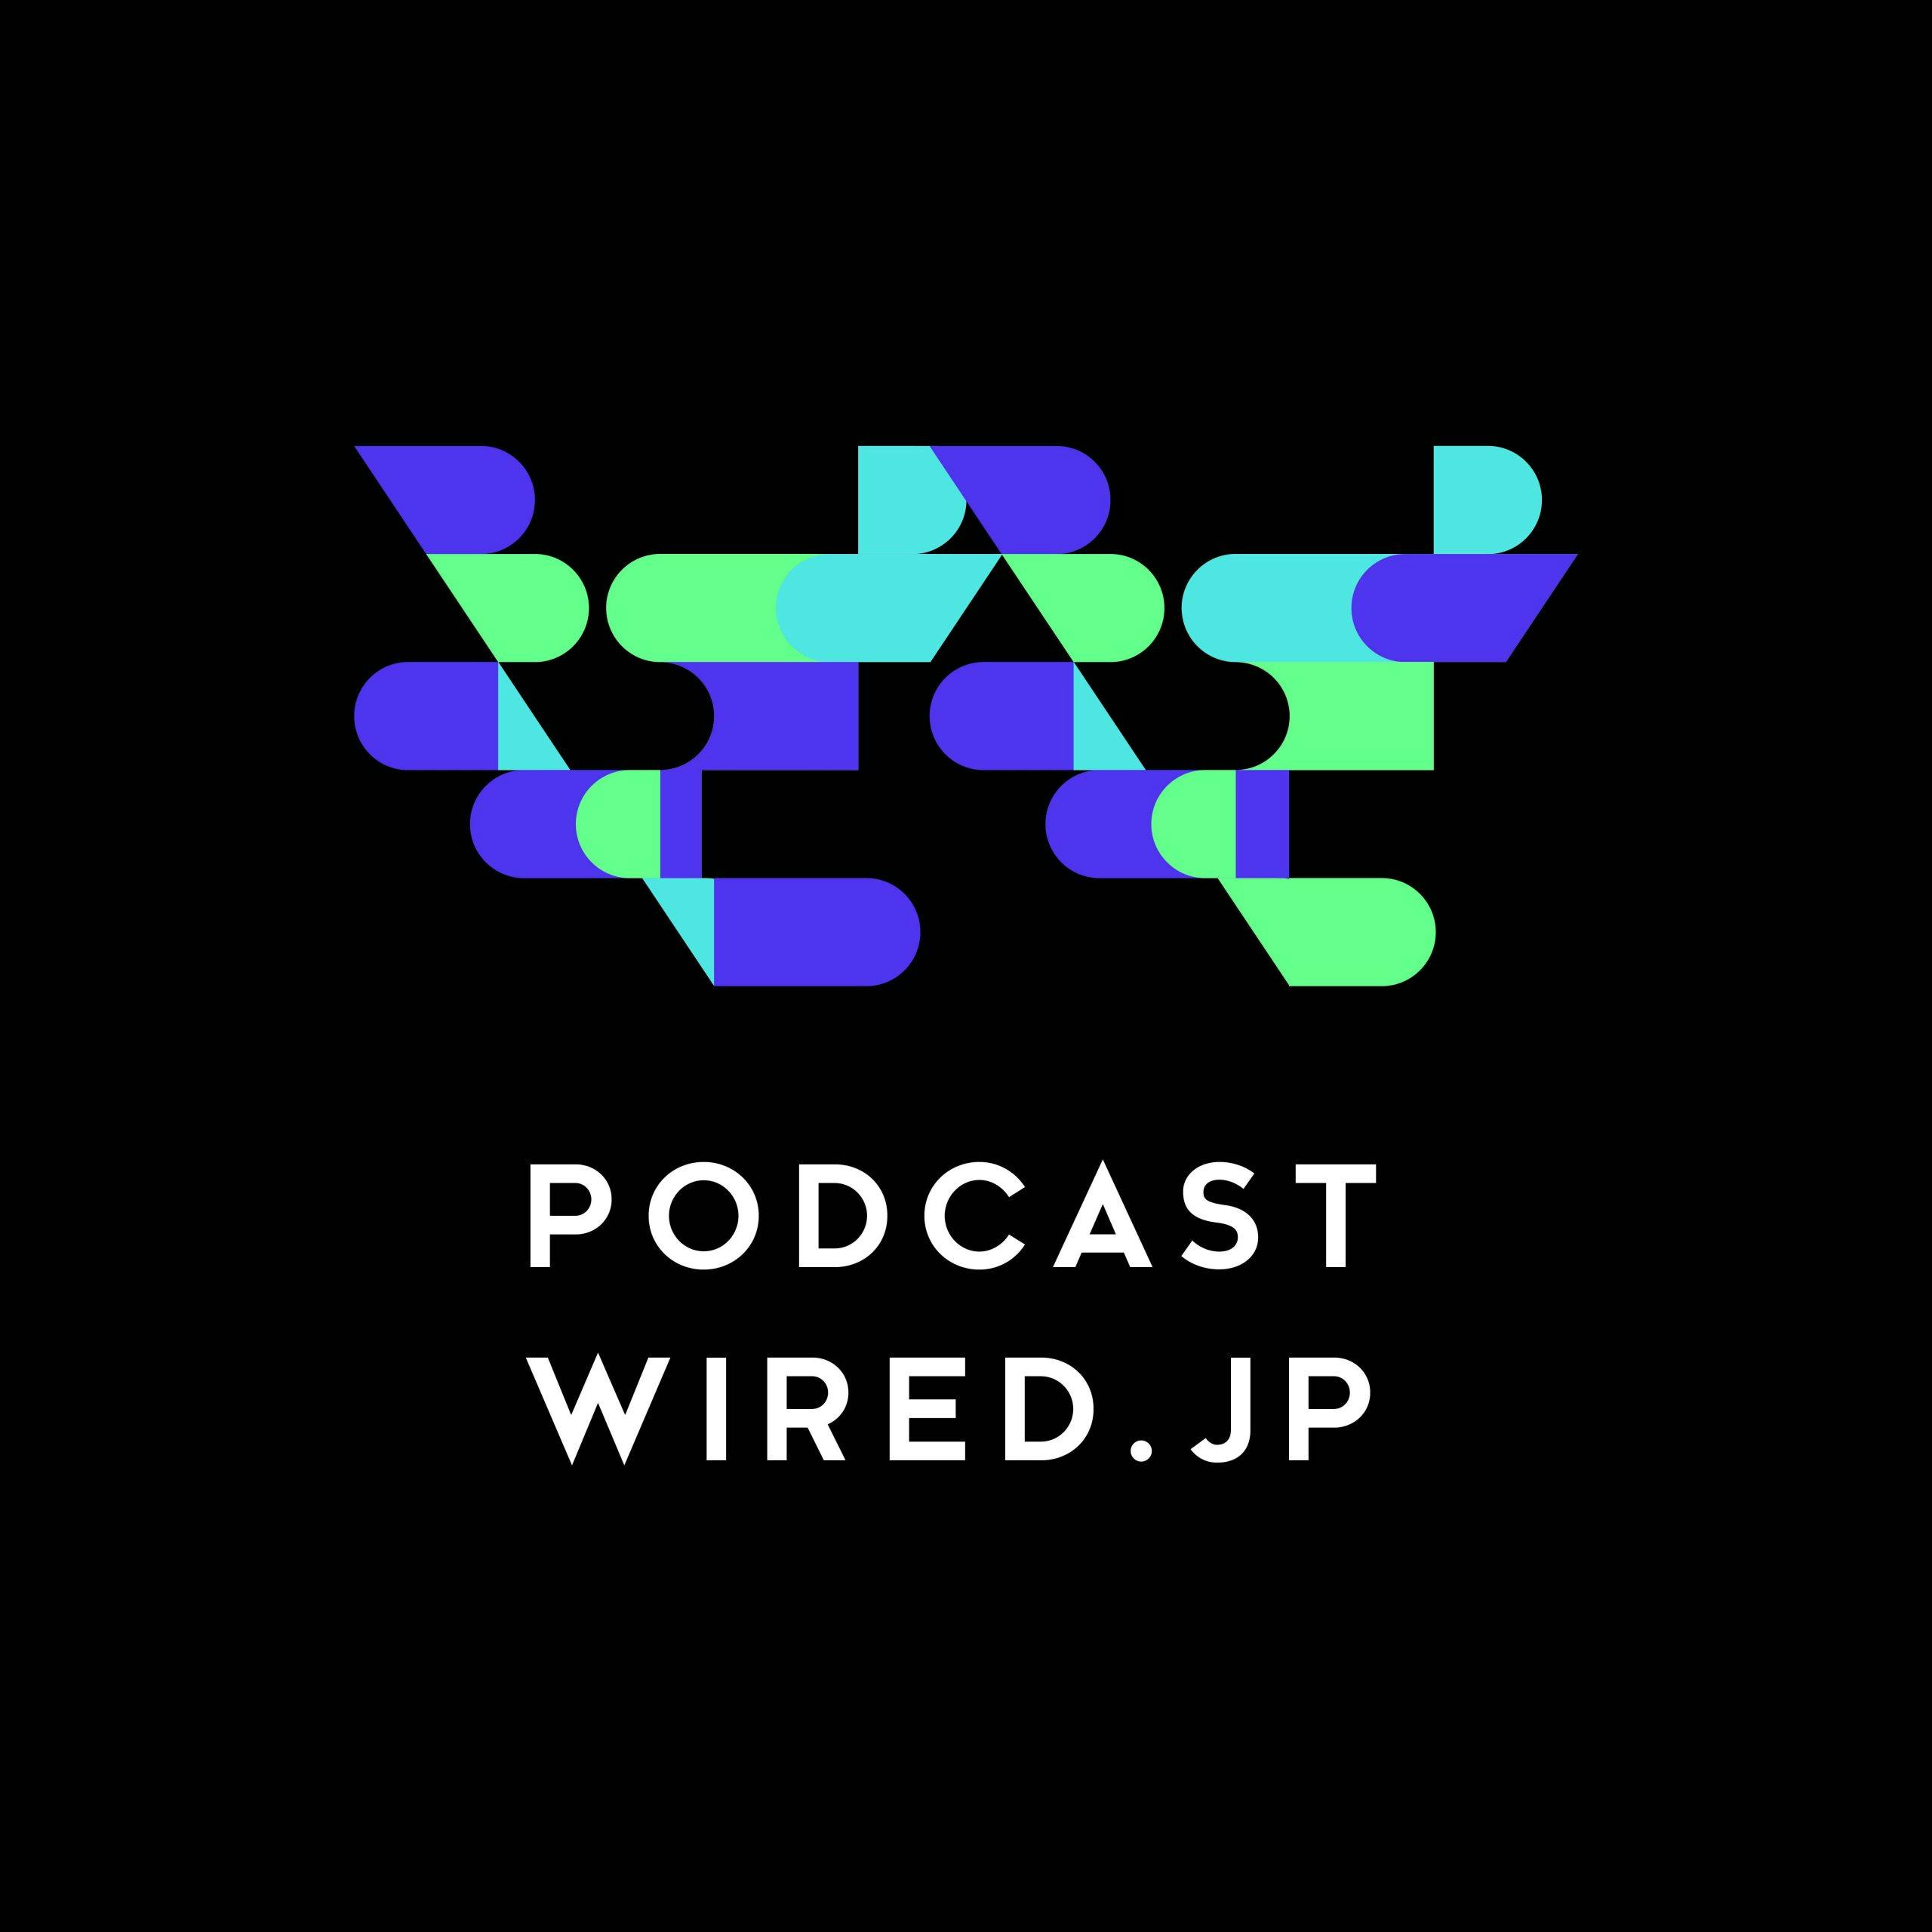 『WIRED』Podcastで配信<br>本当に必要な道具とは何か<br>〜夏目 彰（山と道）× 松島倫明（『WIRED』日本版）